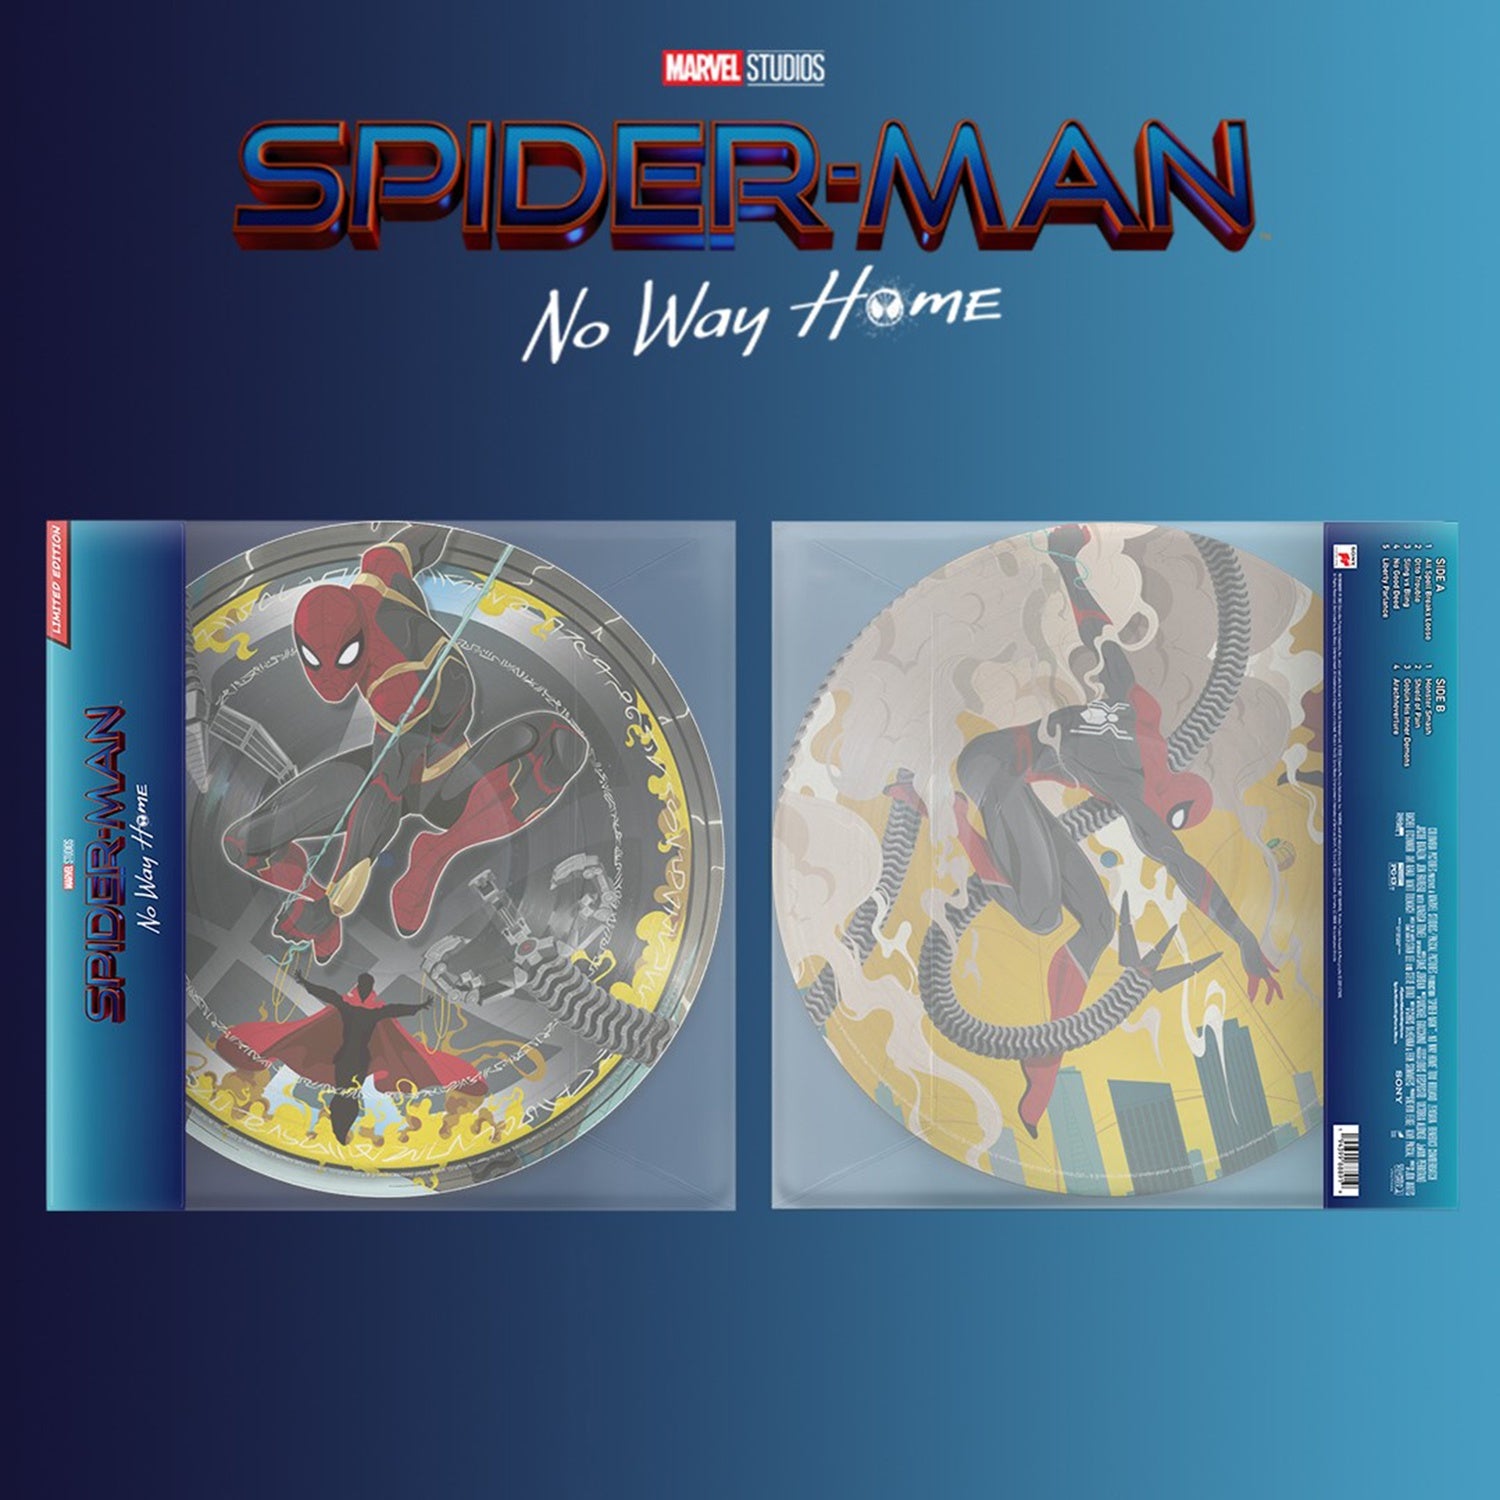 Michael Giacchino – Spider-Man: No Way Home (Original Motion Picture Soundtrack) - New LP Record 2022 Sony Classical Europe Picture Disc Vinyl - Soundtrack